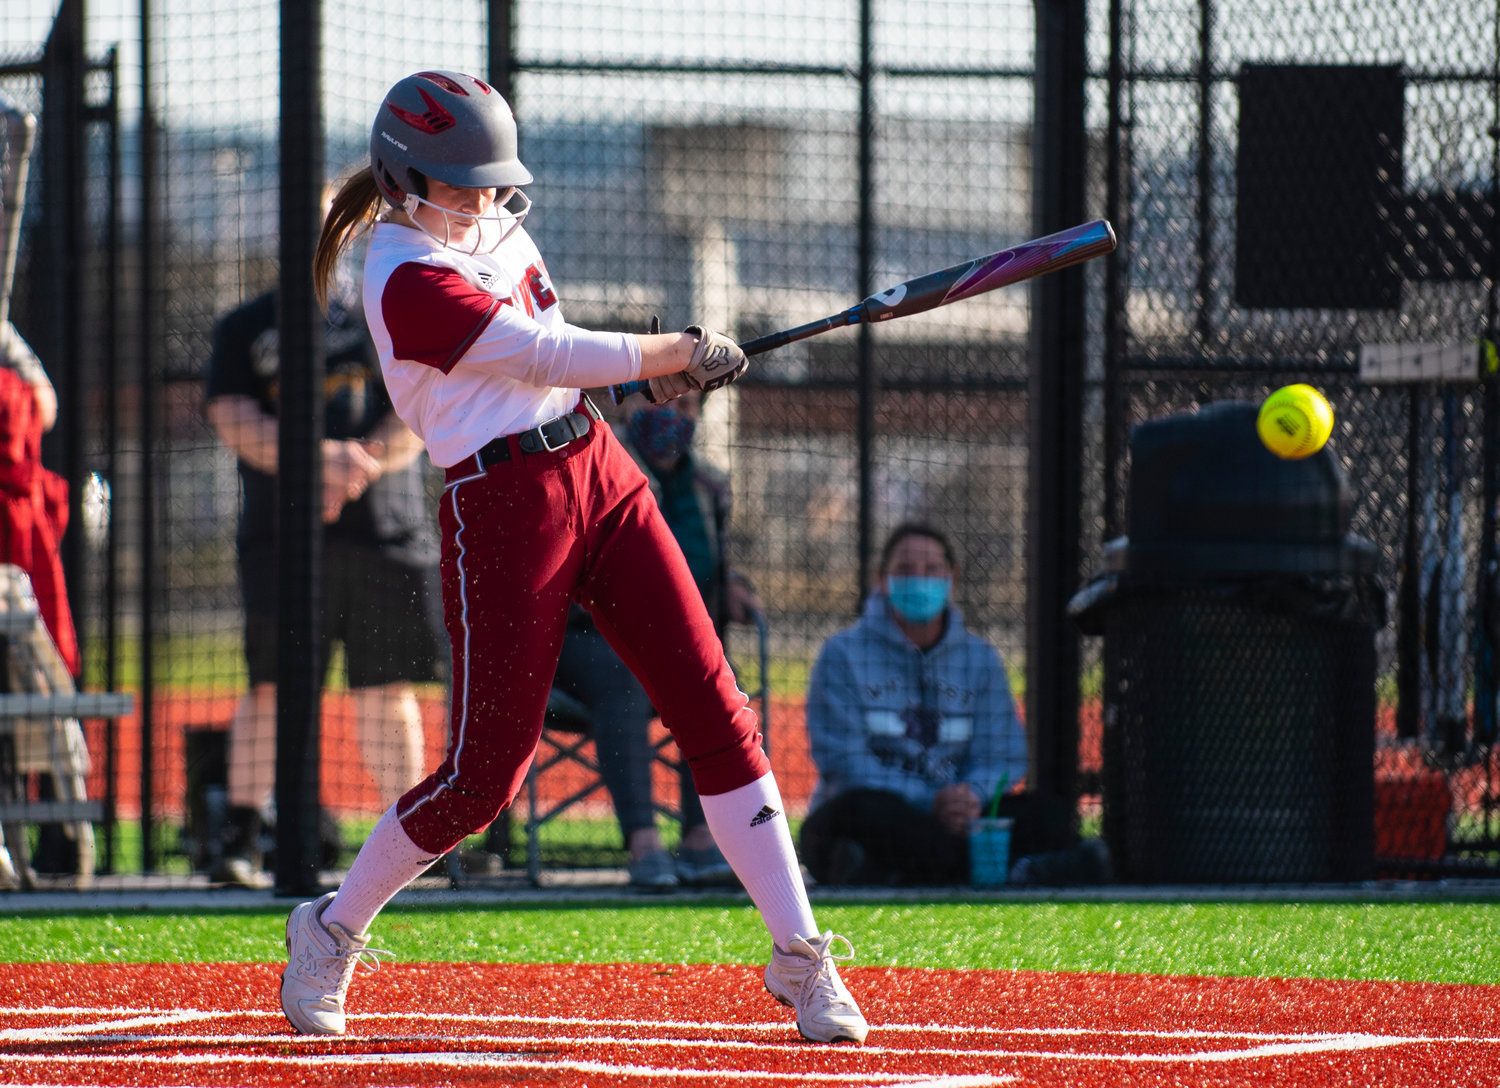 W.F. West sophomore Rachel Gray connects on a Rochester pitch on Wednesday.